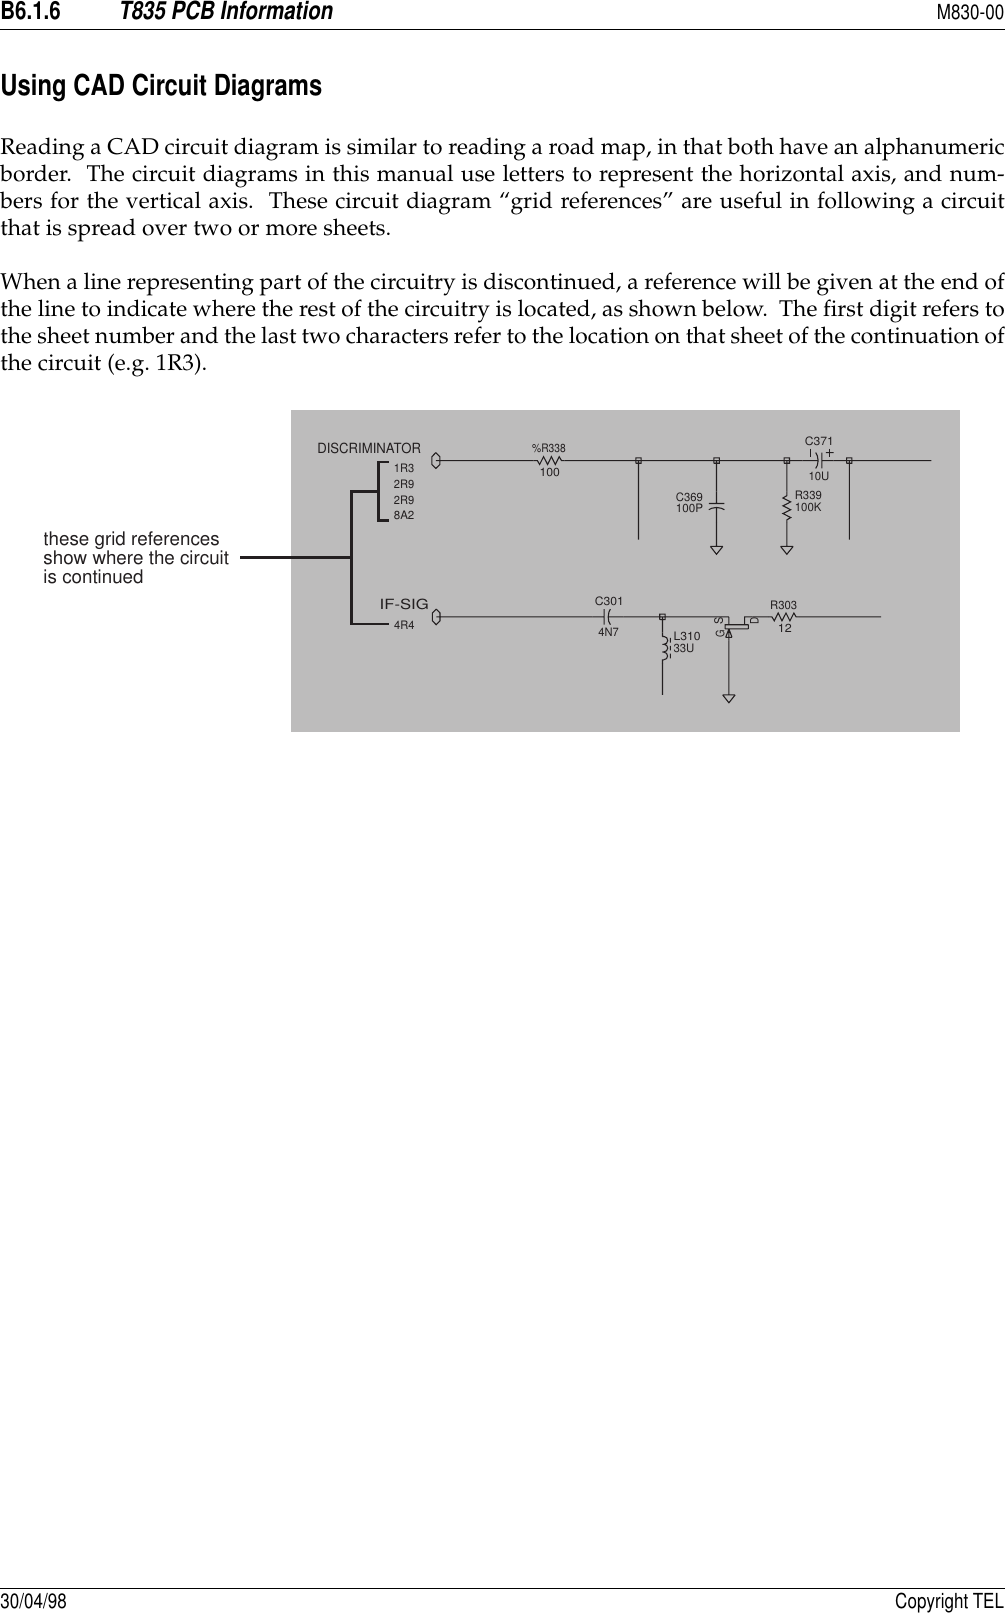 B6.1.6T835 PCB InformationM830-0030/04/98 Copyright TELUsing CAD Circuit DiagramsReading a CAD circuit diagram is similar to reading a road map, in that both have an alphanumericborder.  The circuit diagrams in this manual use letters to represent the horizontal axis, and num-bers for the vertical axis.  These circuit diagram “grid references” are useful in following a circuitthat is spread over two or more sheets.When a line representing part of the circuitry is discontinued, a reference will be given at the end ofthe line to indicate where the rest of the circuitry is located, as shown below.  The first digit refers tothe sheet number and the last two characters refer to the location on that sheet of the continuation ofthe circuit (e.g. 1R3).C3014N7R30312DSGL31033UIF-SIG4R4C369100PC37110UR339100K%R338100DISCRIMINATOR1R32R92R98A2these grid referencesshow where the circuitis continued